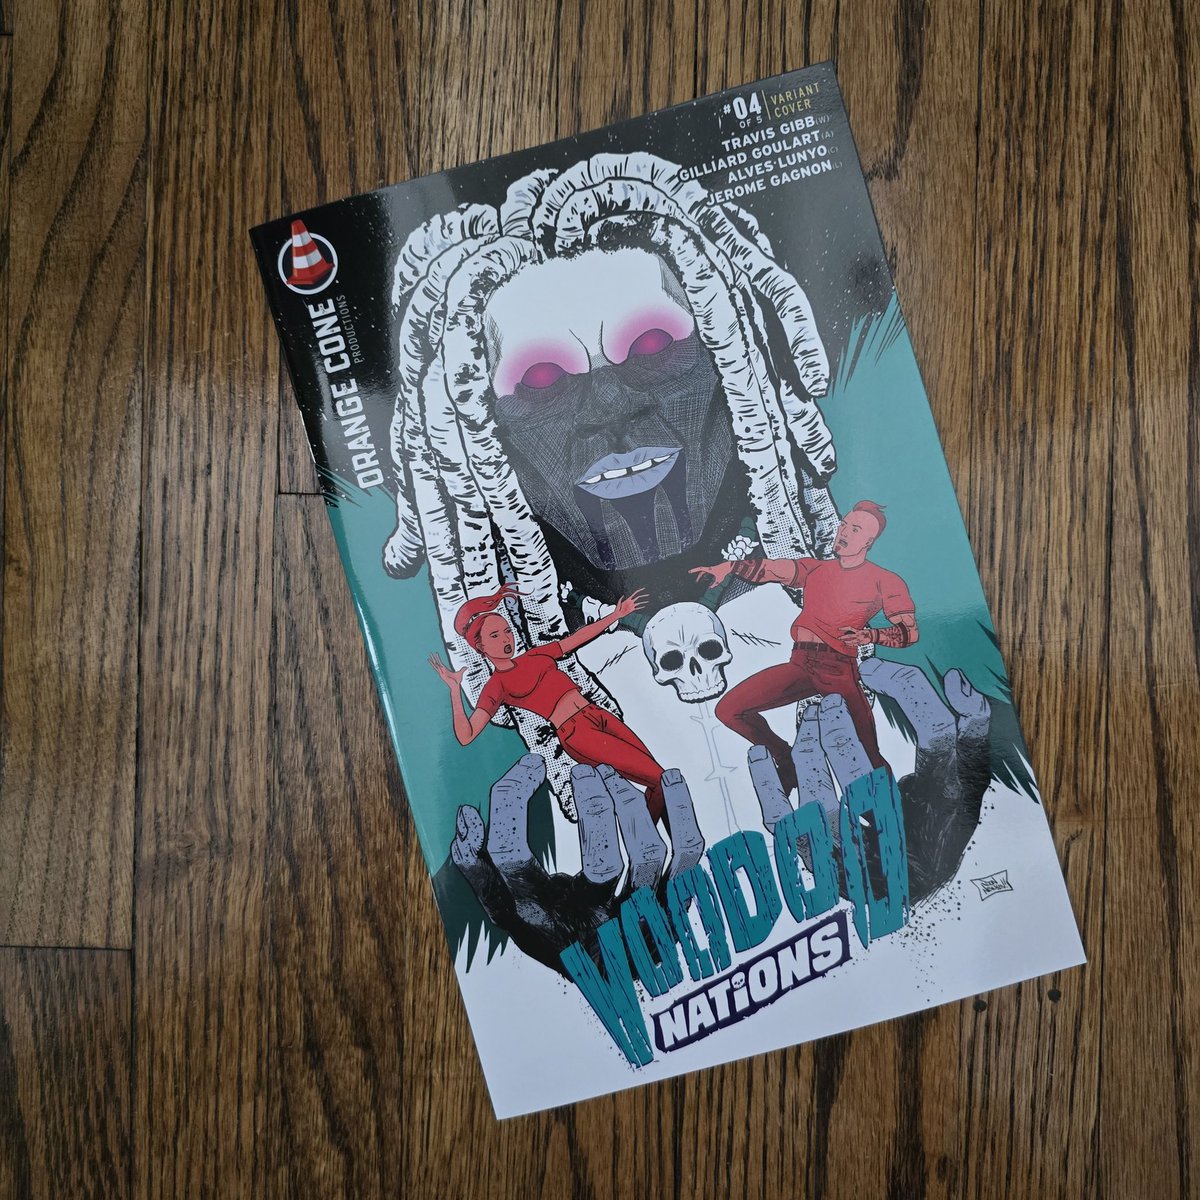 Just received my variant for @jesterlou Voodoo Nations #4. I have 5 copies & they're $20 each. Signatures are free, bring a witness. I'll be at @ComicConRvltn this weekend. comicconrevolution.com/ontario/ticket…